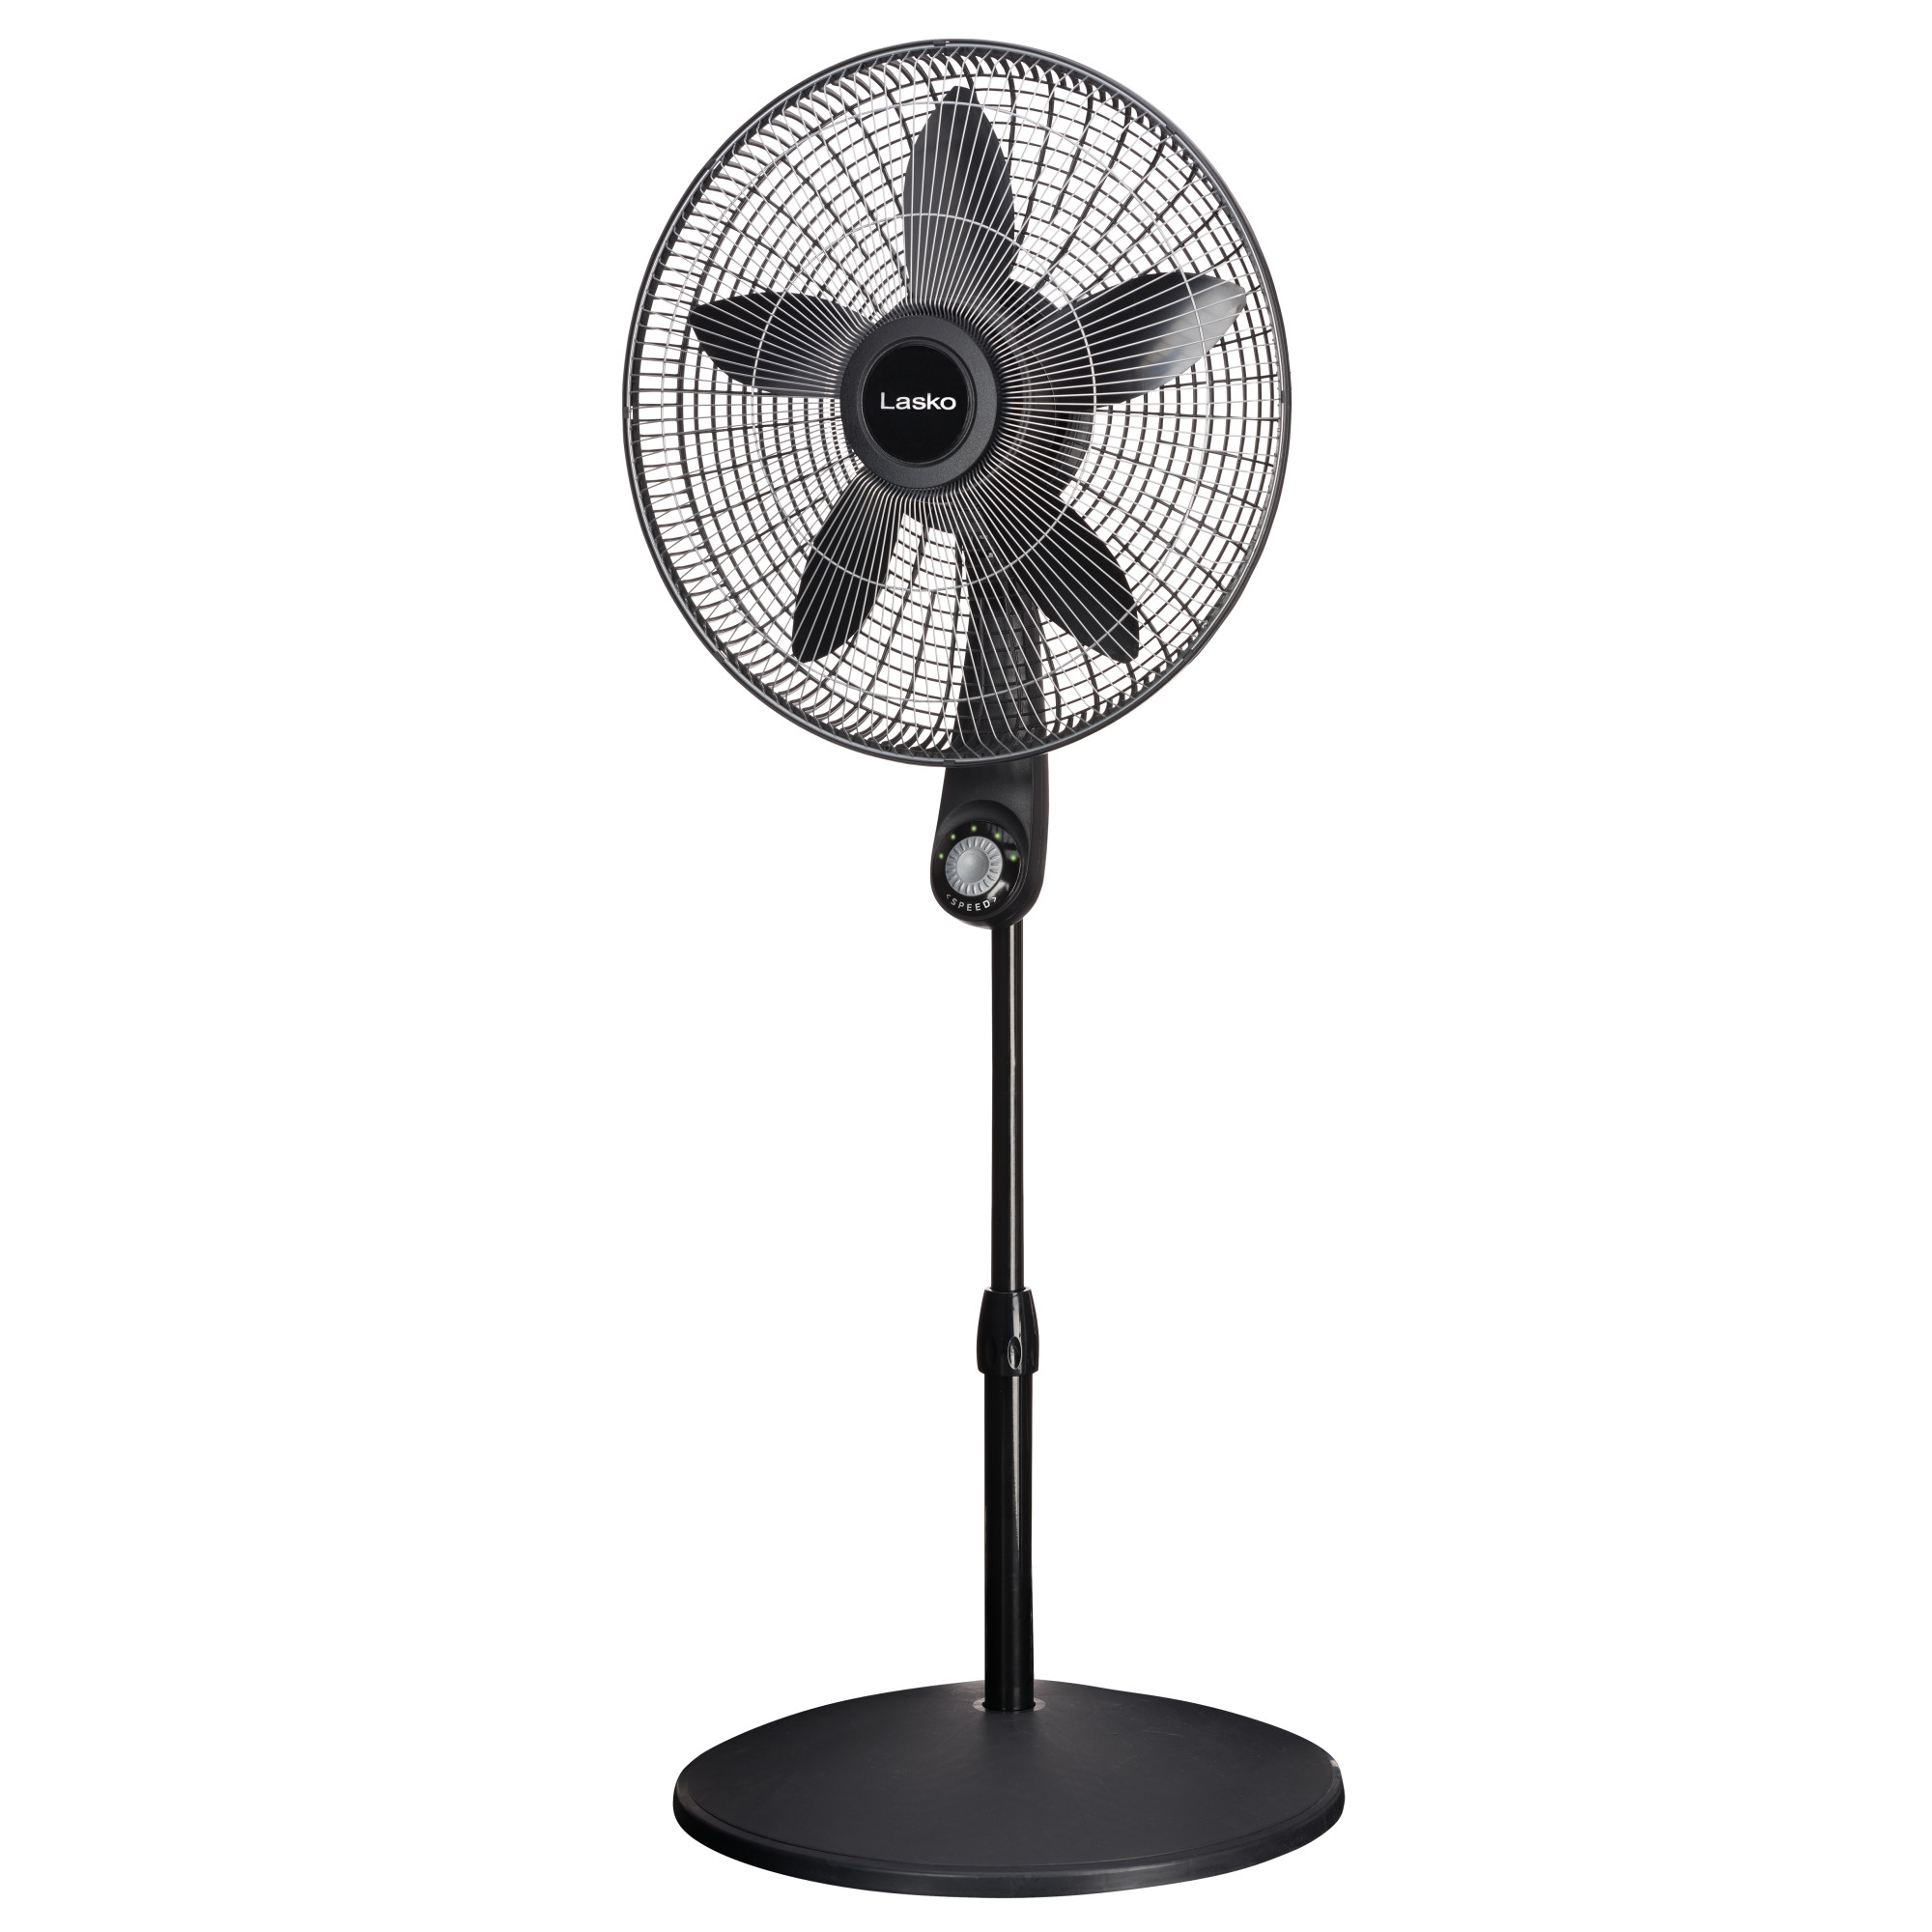 Lasko 18" 5-Speed High Performance Pedestal Fan with Remote, 54" H, Black, S18602, New - image 1 of 7